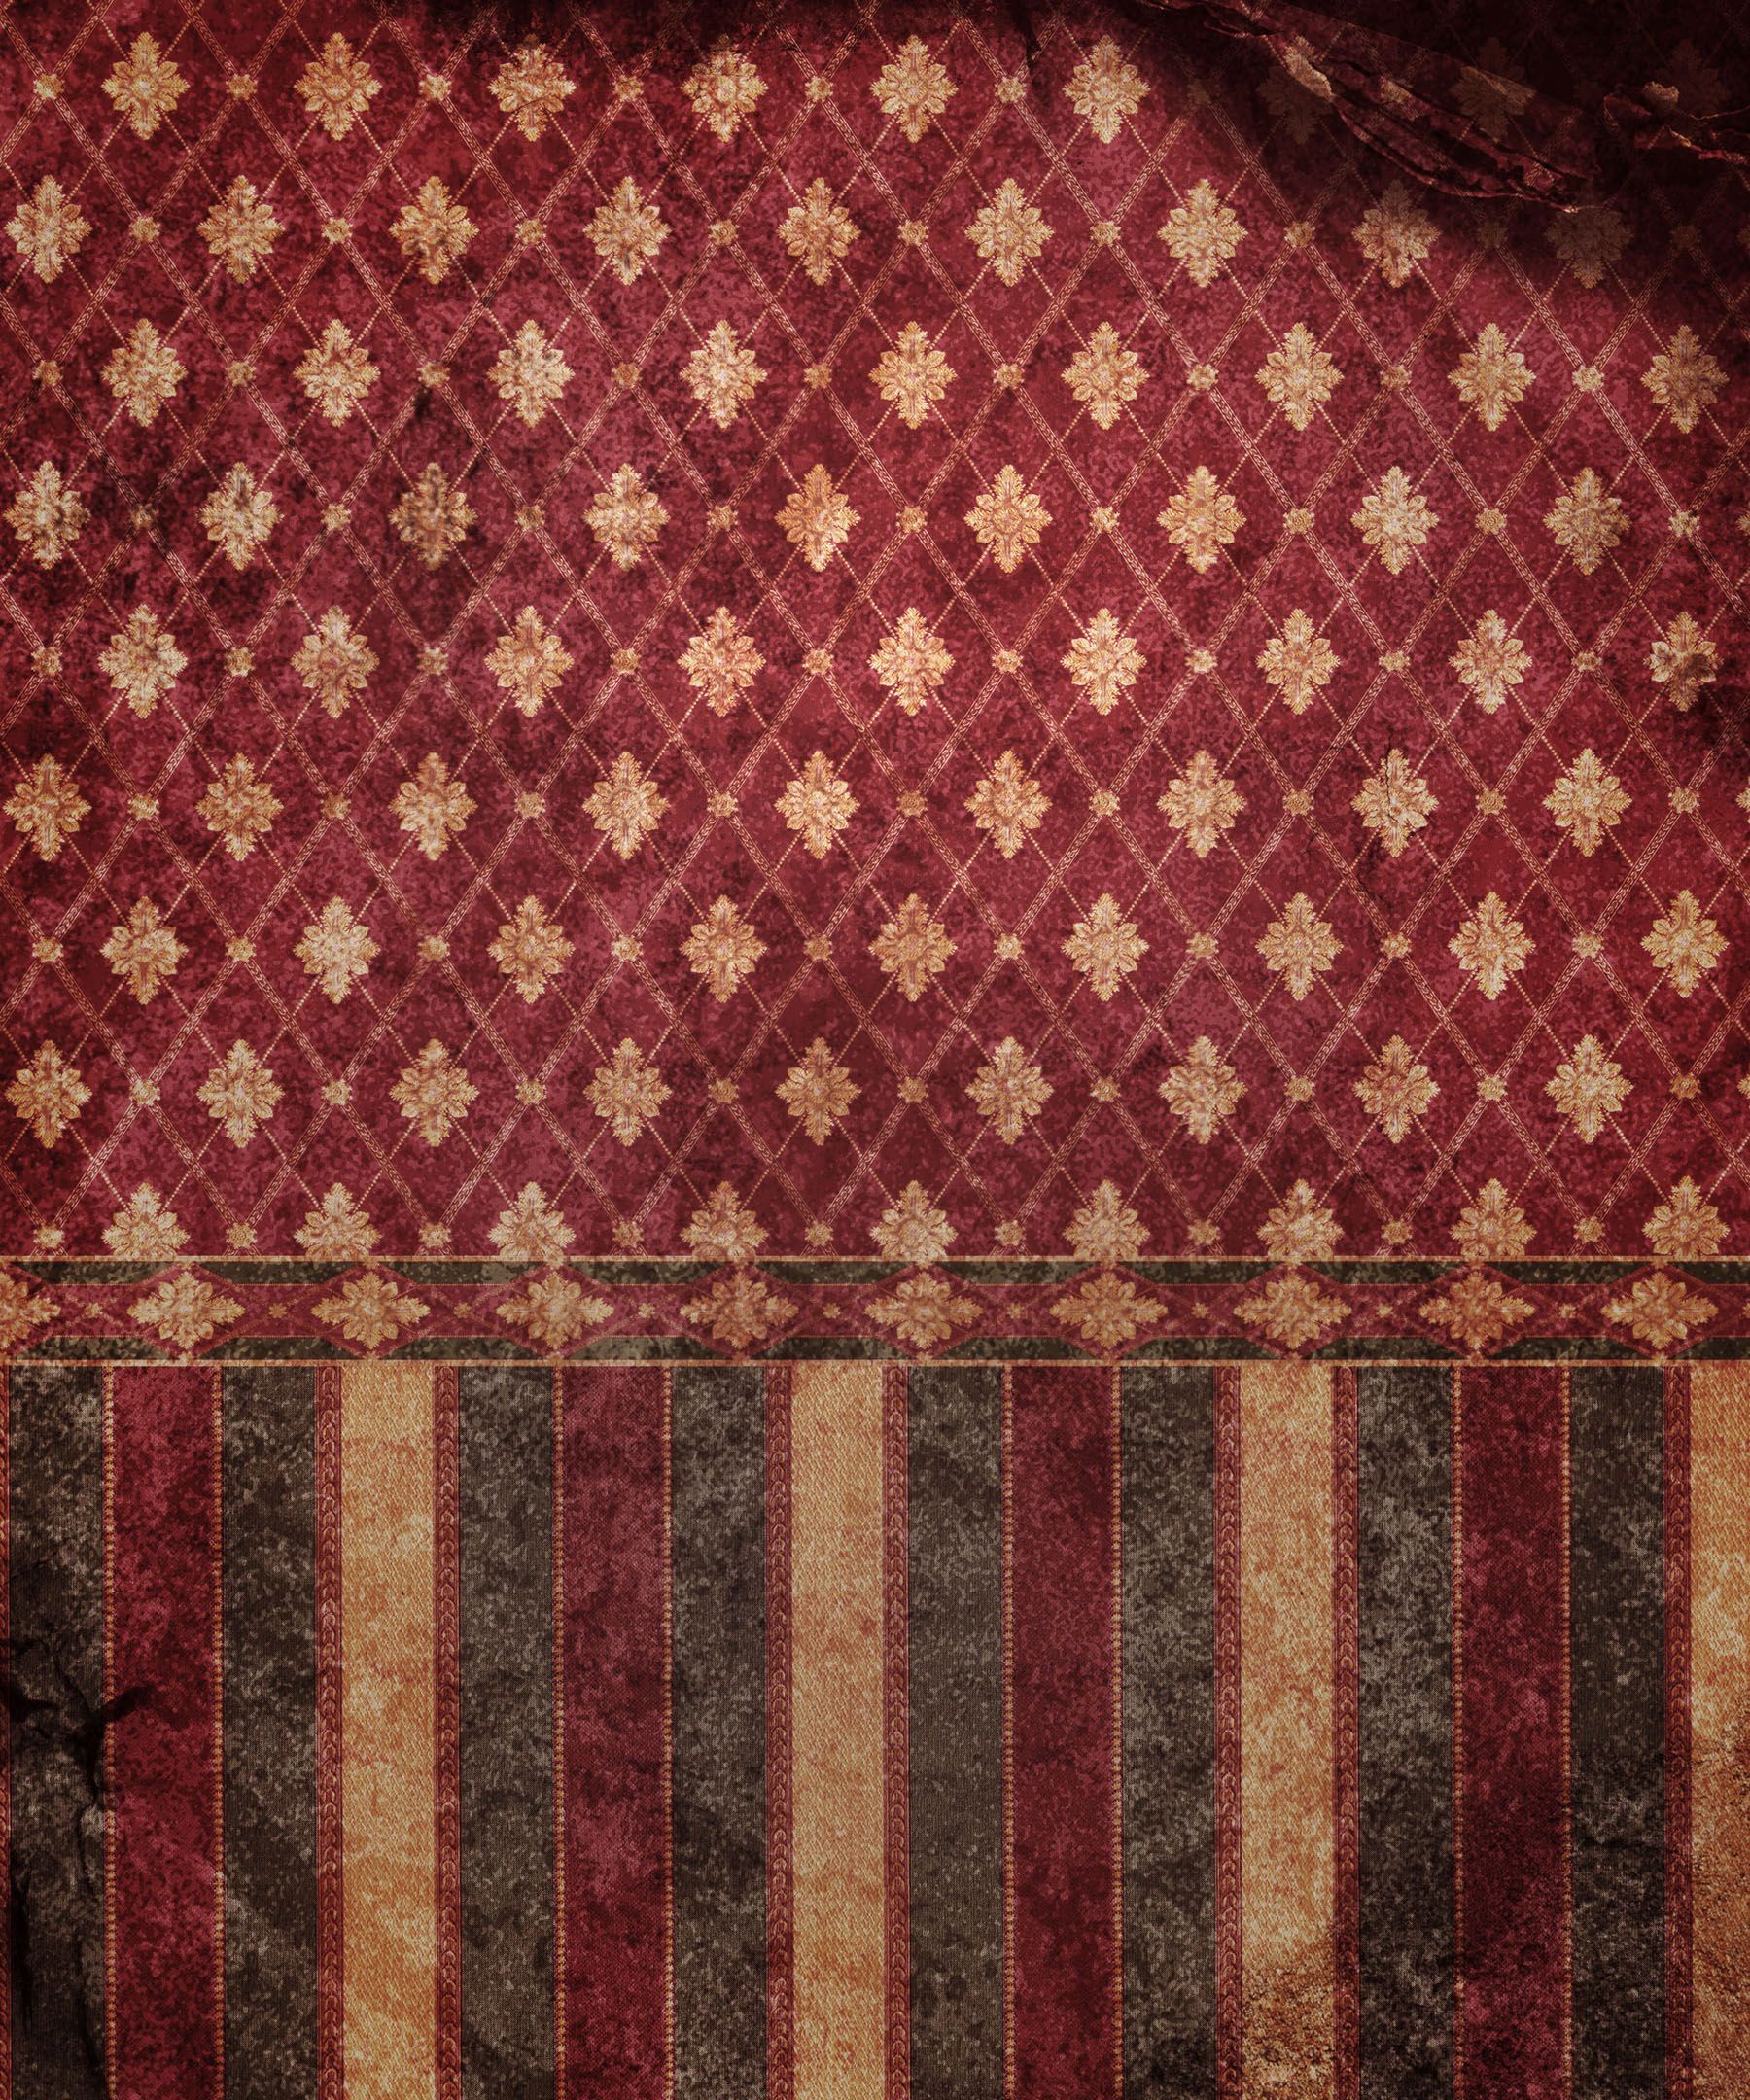 Old European-style wall wallpaper 12107 - Background patterns - Others